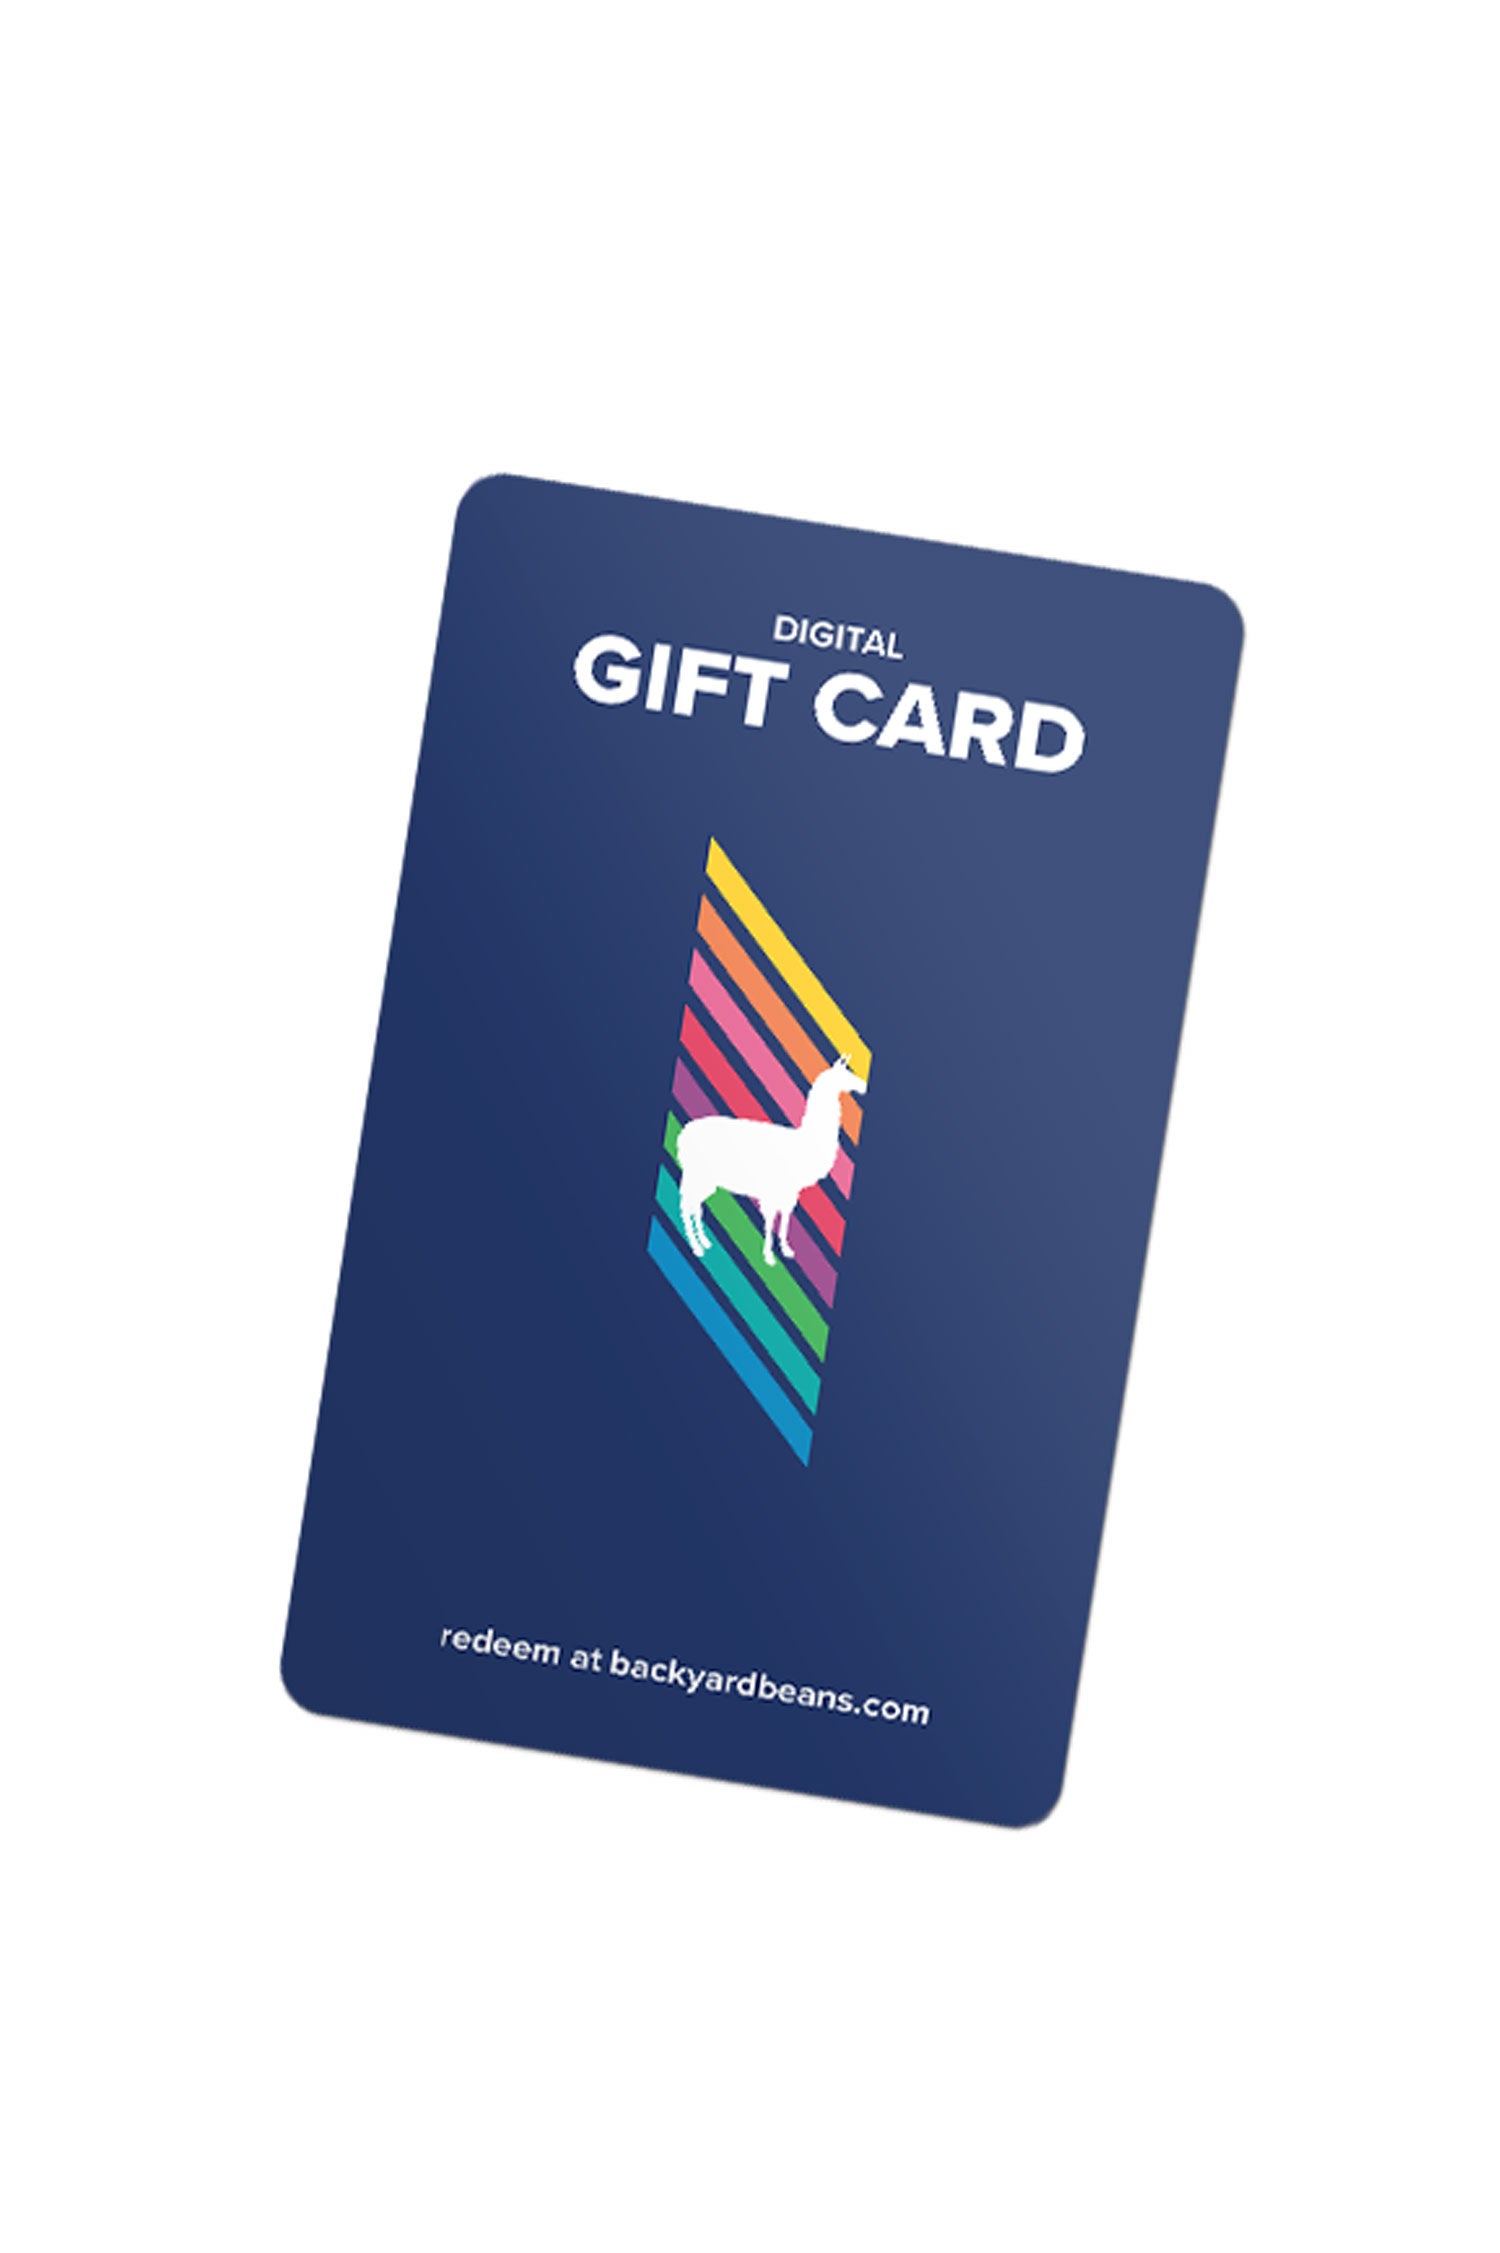 Image of a digital gift card.